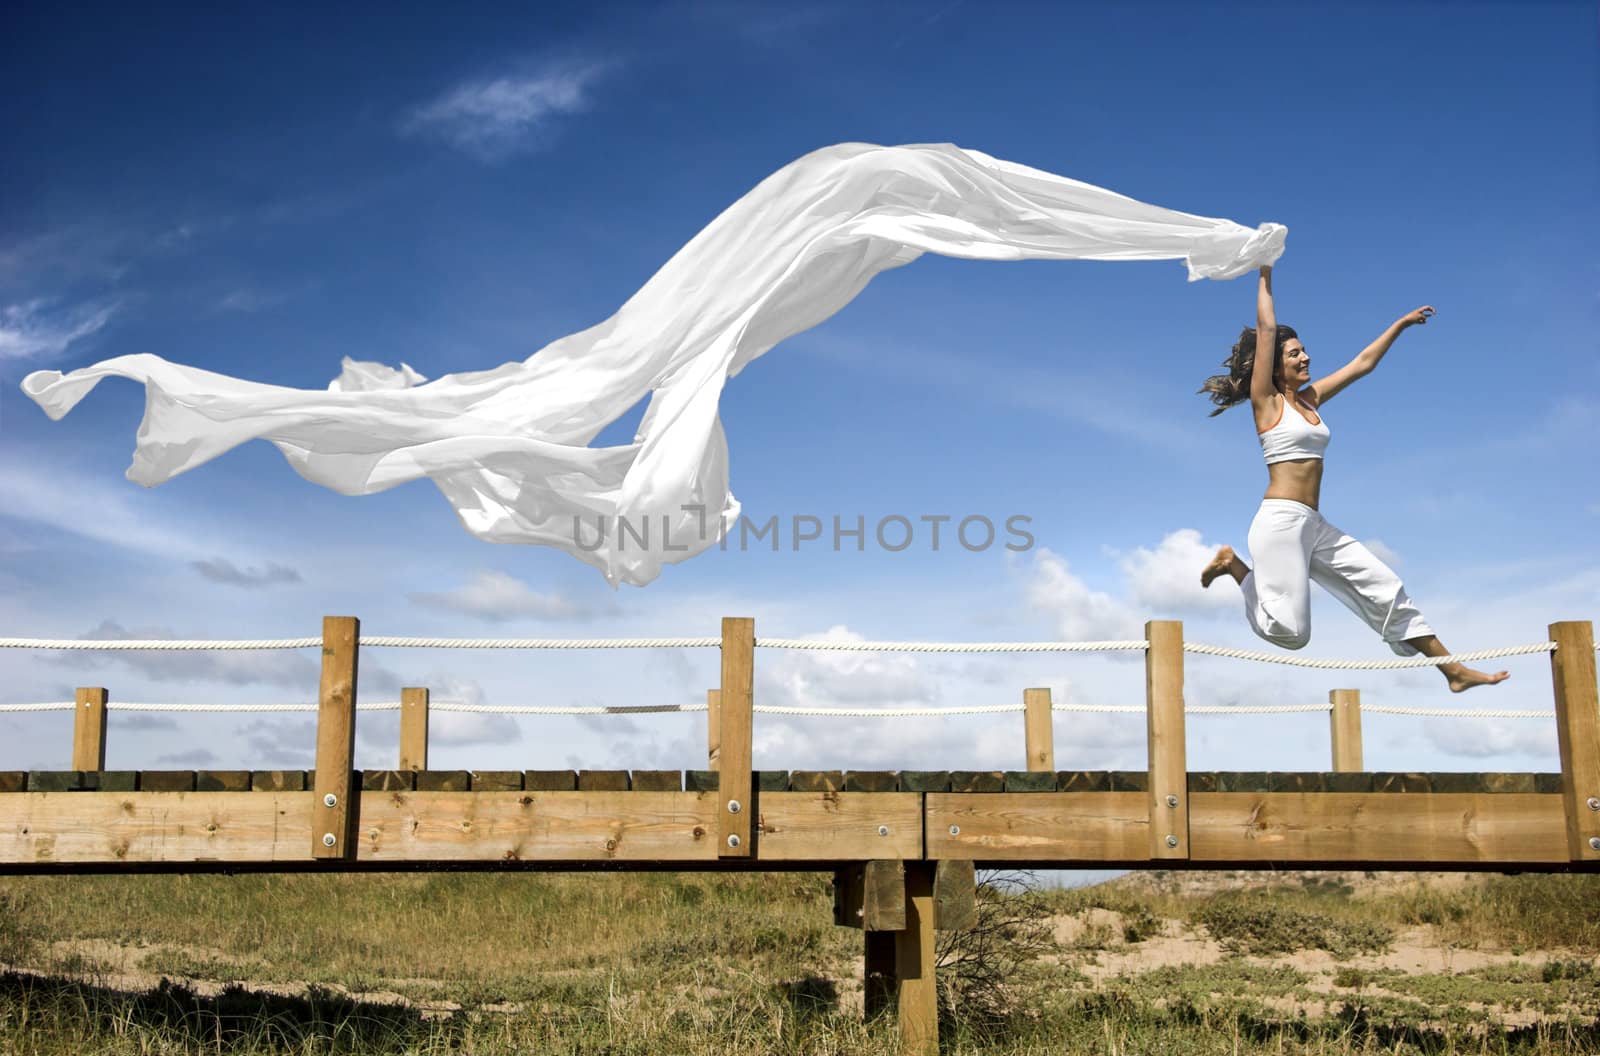 Jumping with a scarf by Iko